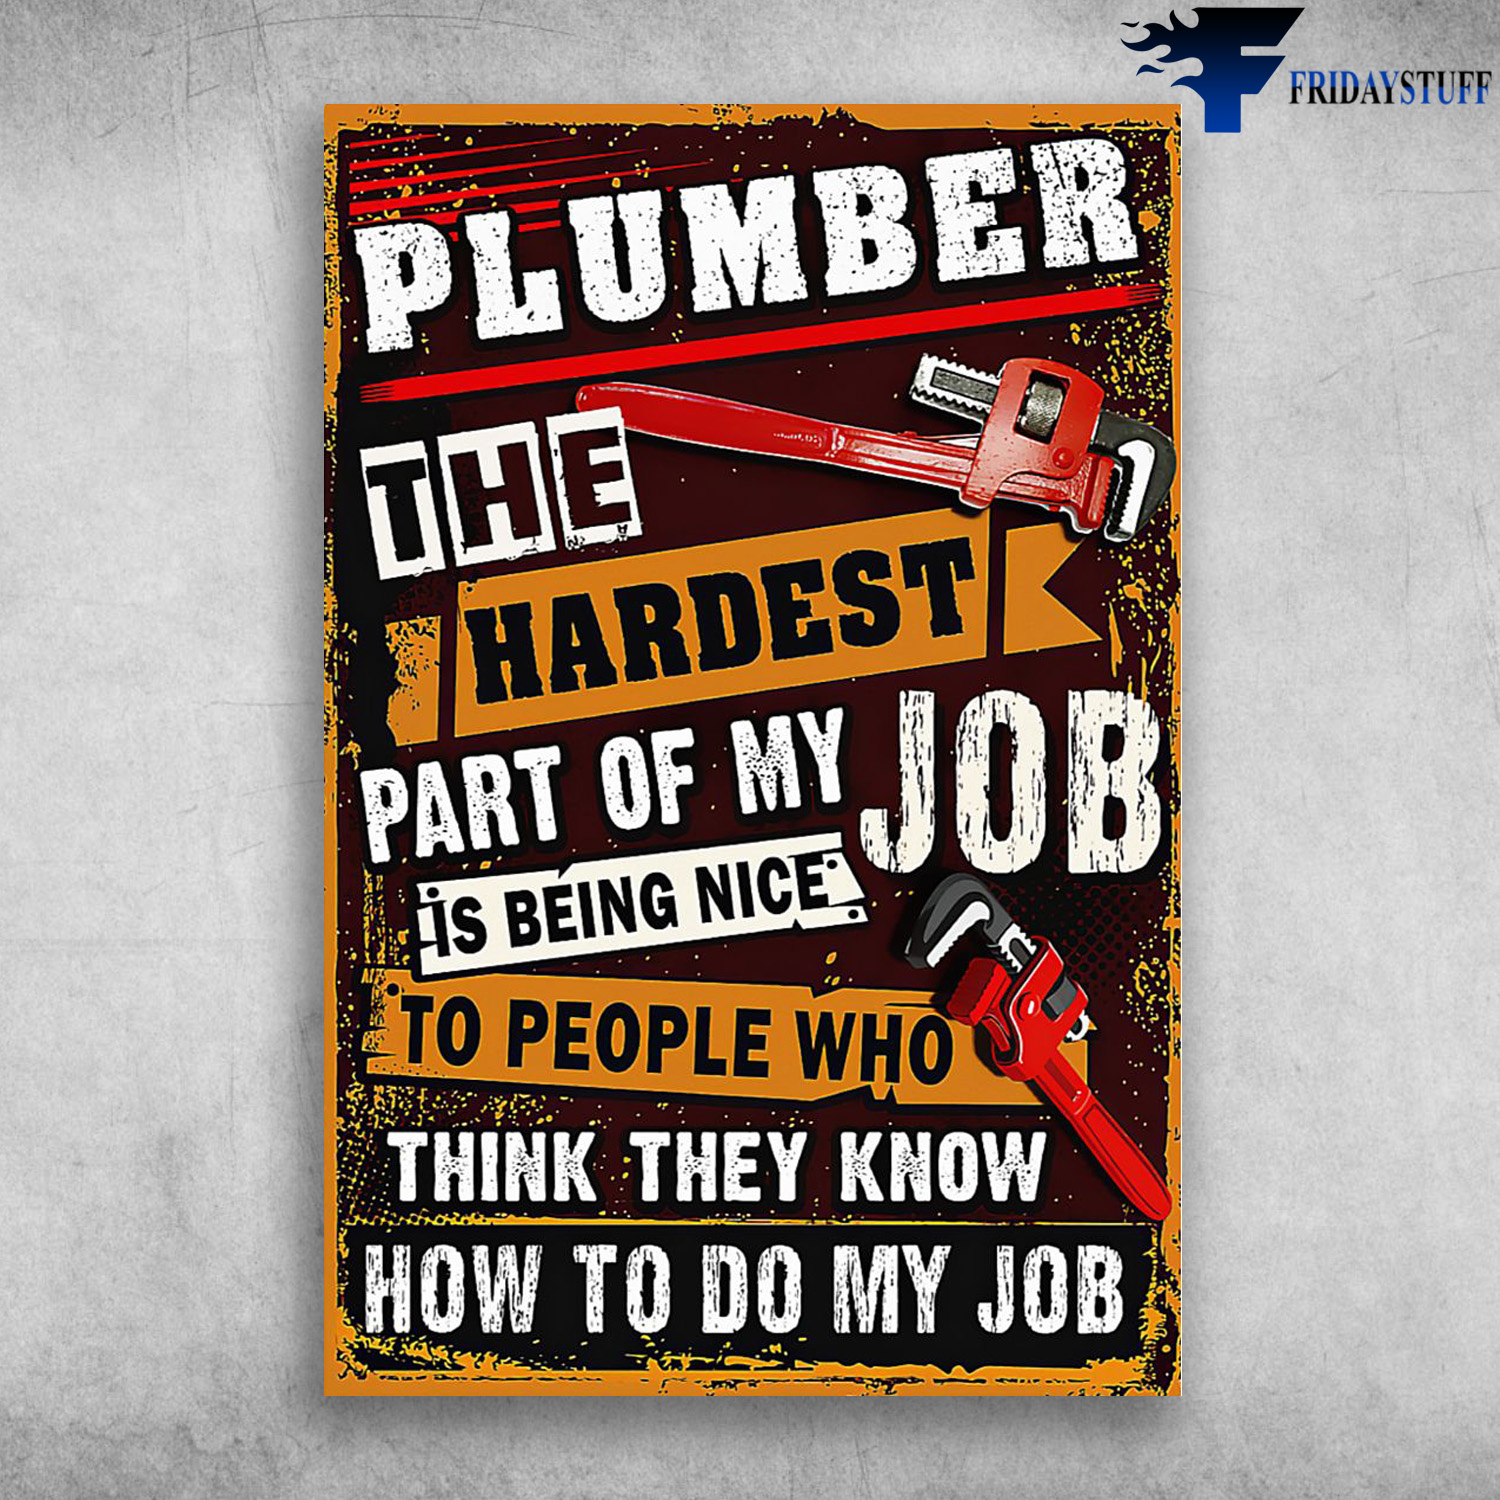 Plumber - The Hardest Part Of My Job, Is Being Nice To People Who Think They Know, How To Do My Job